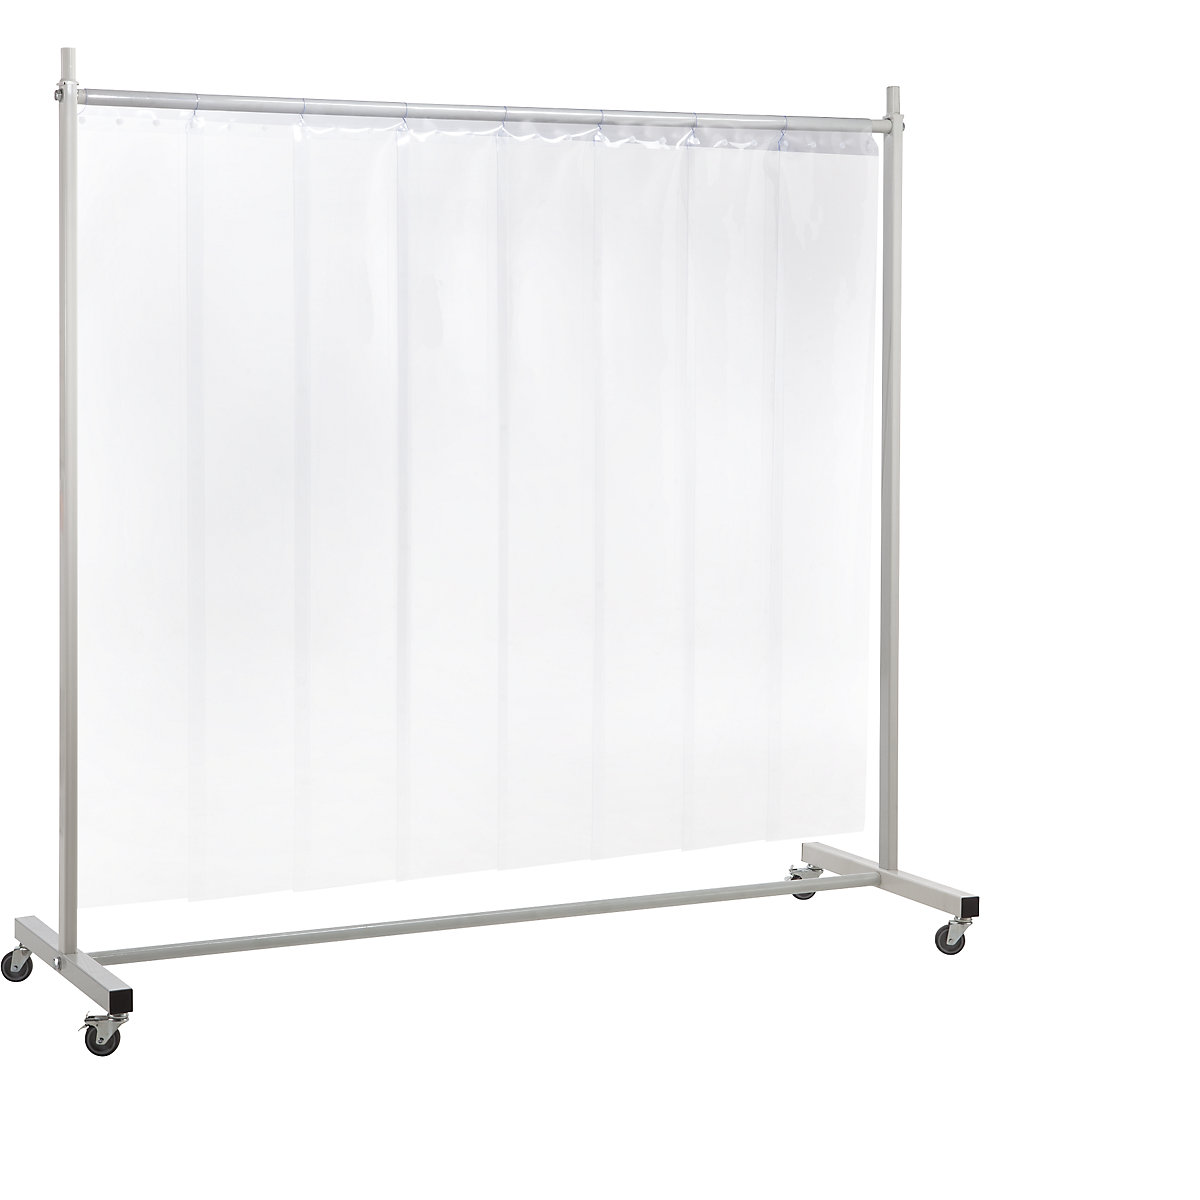 Protective screen, mobile, with lamella curtain, transparent, WxH 2100 x 2100 mm, 1-part-2